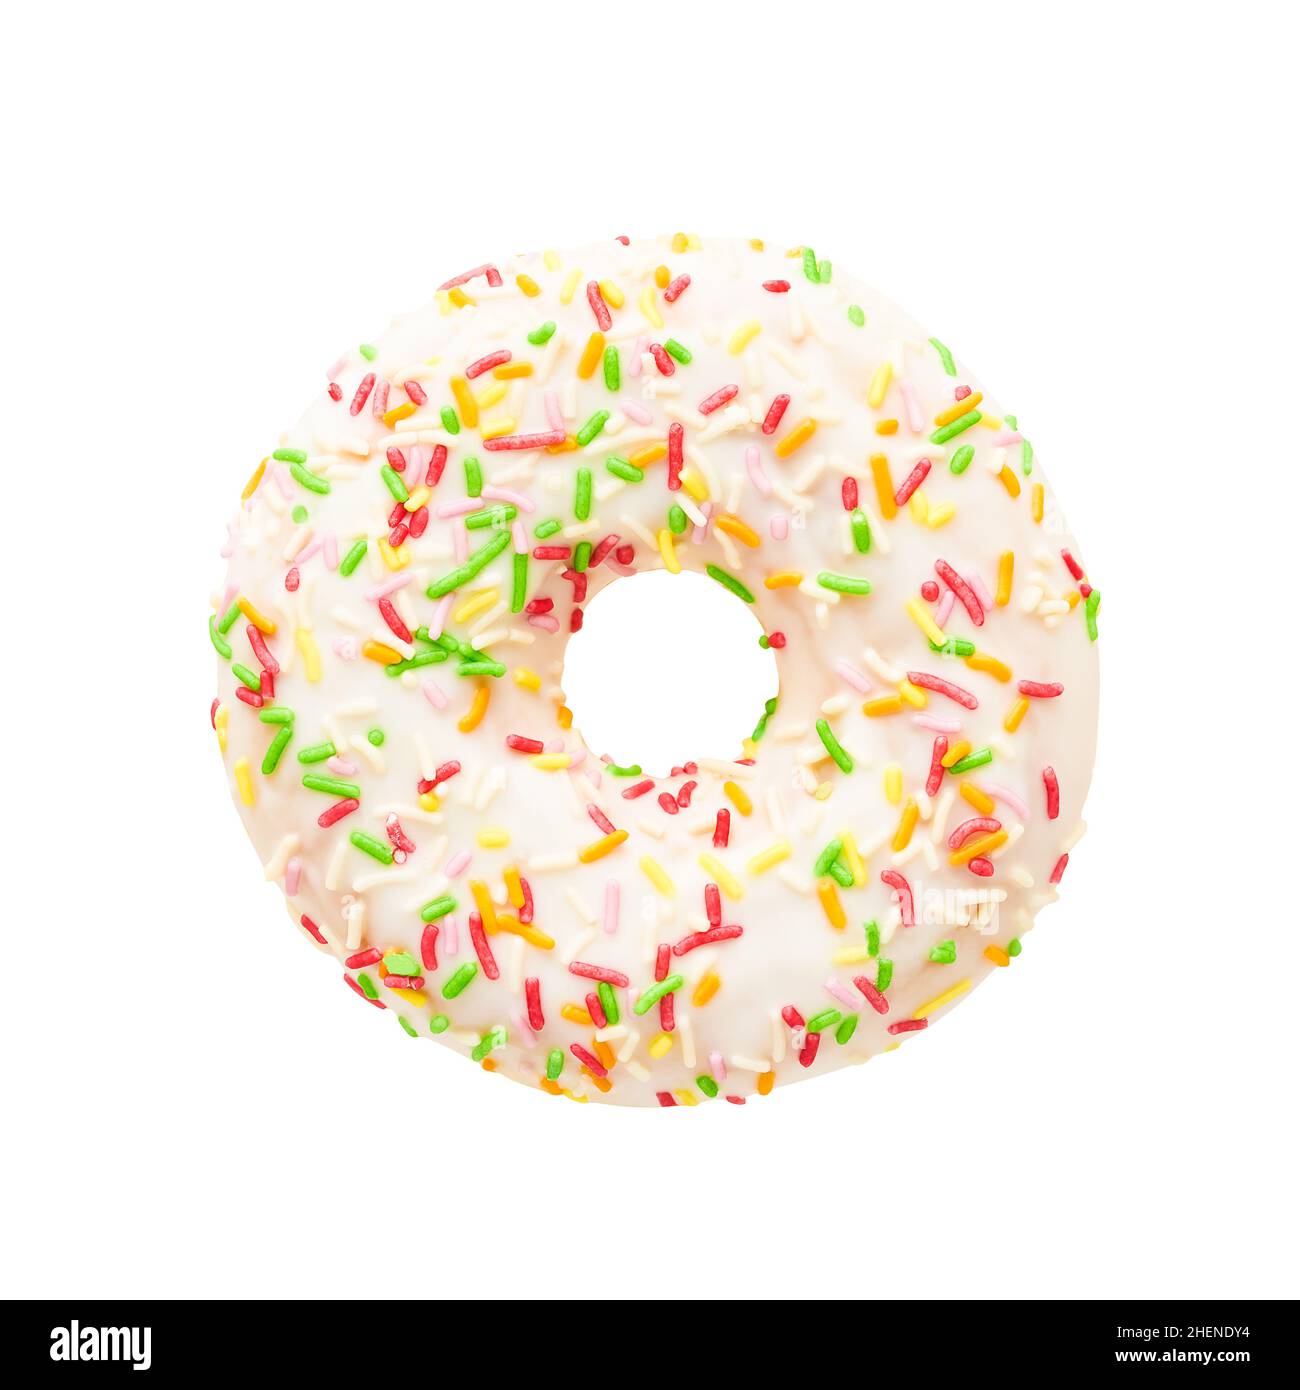 Donut in white glaze with colorful sprinkles isolated over white background with clipping path. Stock Photo